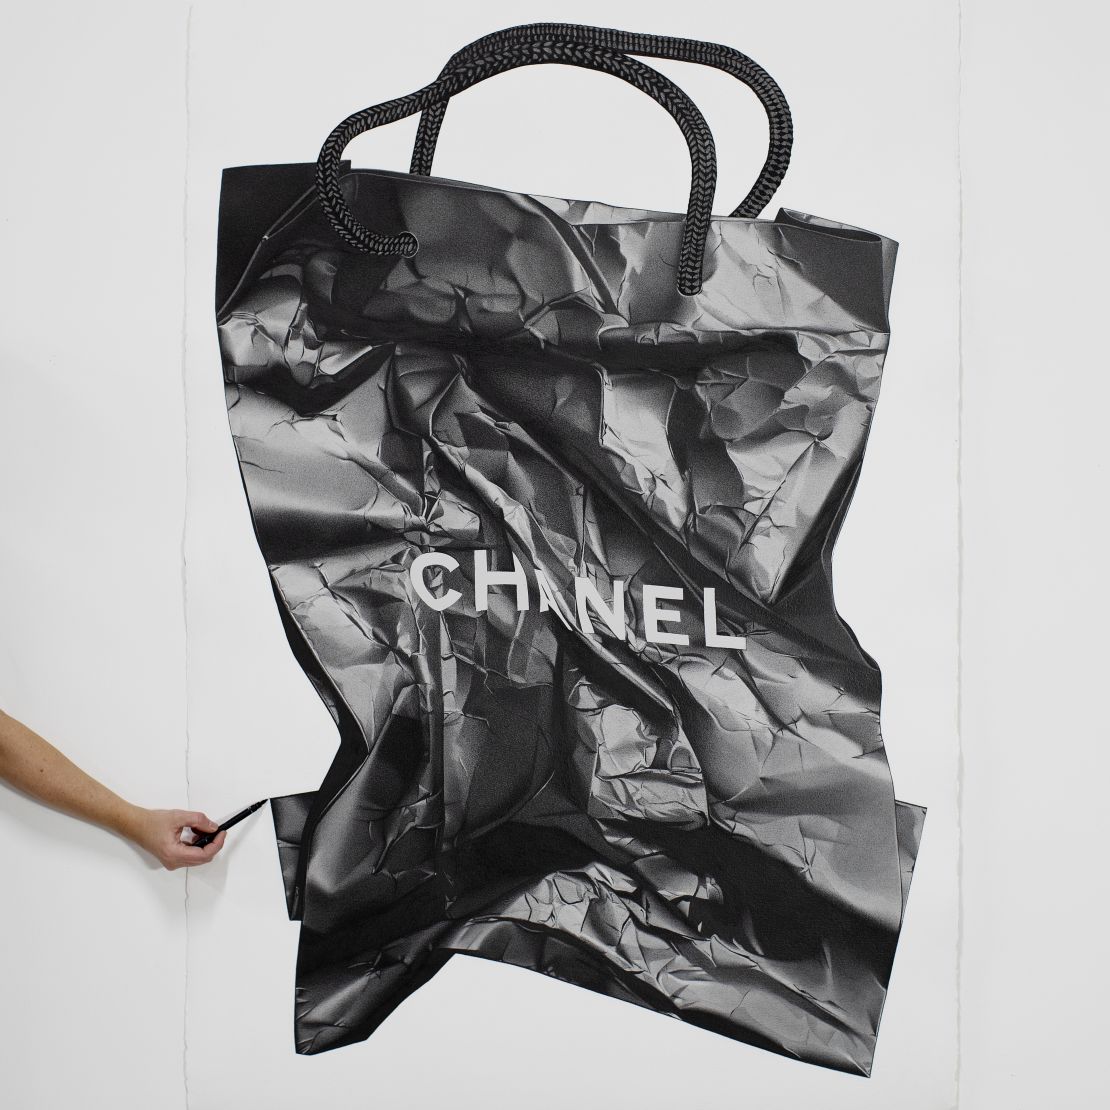 A photorealistic illustration of a Chanel shopping bag by CJ Hendry